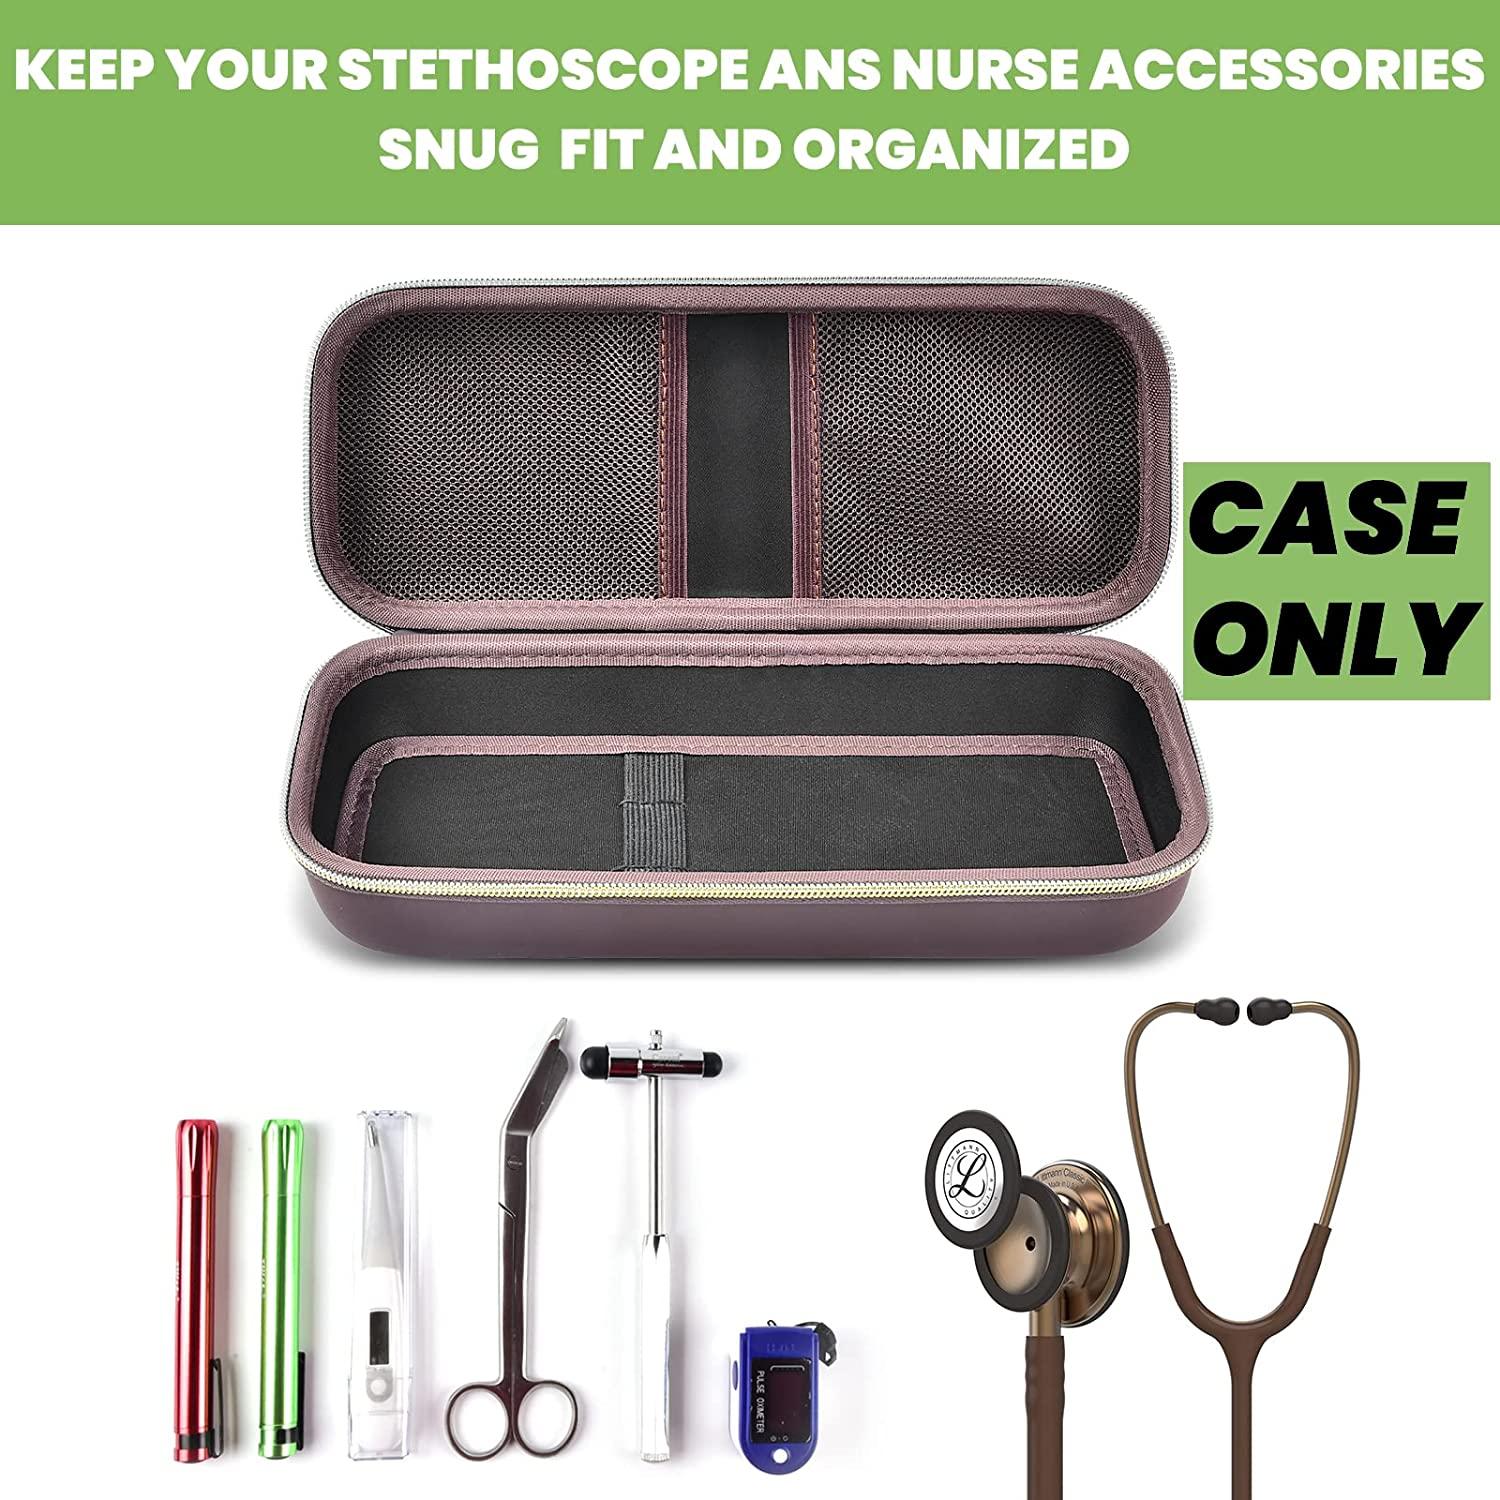 Stethoscope Case Compatible with 3M Littmann Classic III Monitoring/Lightweight II S.E/Cardiology IV Diagnostic/MDF Acoustica Stethoscopes, Extra Pocket Doctor & Nurse Accessories (Chocolate)